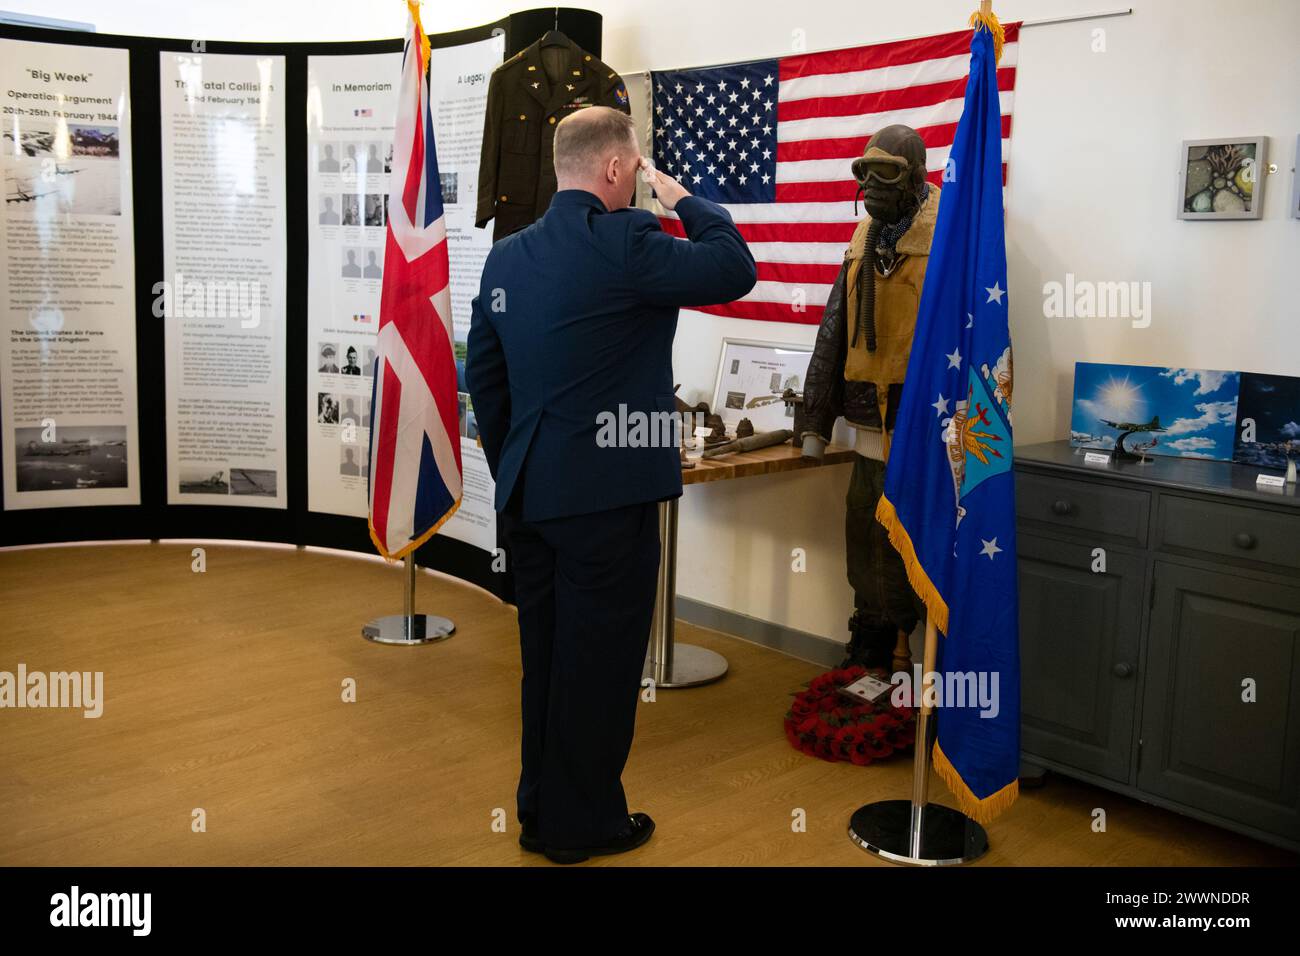 U.S. Air Force Col. D. Landon Phillips, 501st Combat Support Wing commander, salutes while taps is played during wreath laying at a Ceremony of Remembrance at Stanwick Lakes, England, Feb. 22, 2024. U.S. and U.K. leaders gathered to honor 17 Airmen who died in a midair collision on Feb. 22, 1944, involving B-17 Flying Fortresses from the 303rd Bombardment Group at RAF Molesworth and the 384th Bombardment Group at RAF Grafton Underwood. The Airmen were part of Operation Argument, or 'The Big Week,' targeting enemy industrial sites and aircraft facilities in Central Europe to secure Allied air s Stock Photo